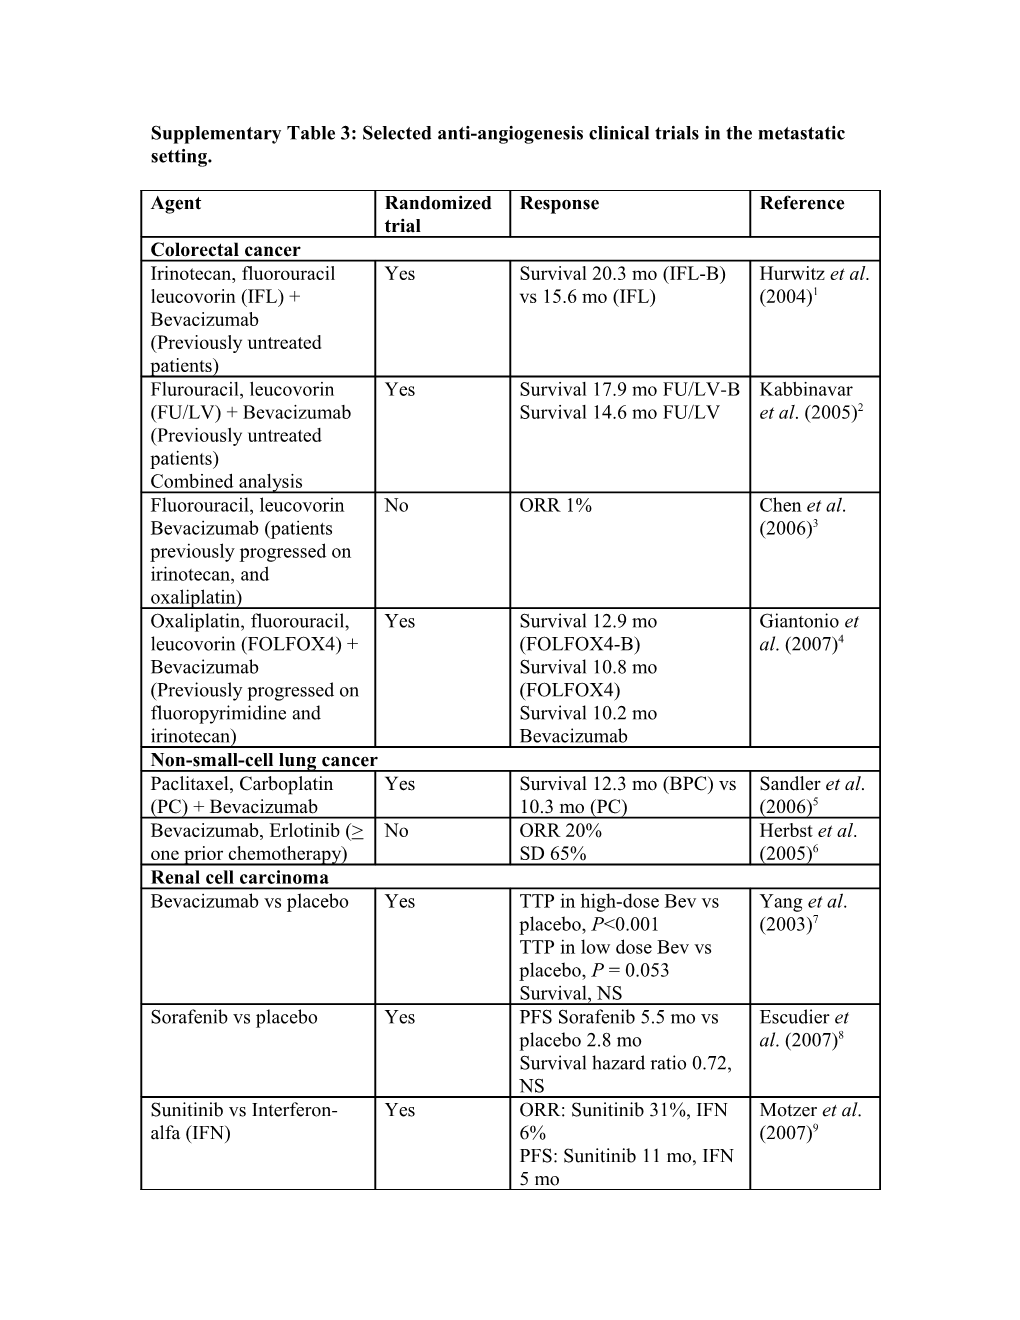 Supplementary Table 3: Selected Anti-Angiogenesis Clinical Trials in the Metastatic Setting